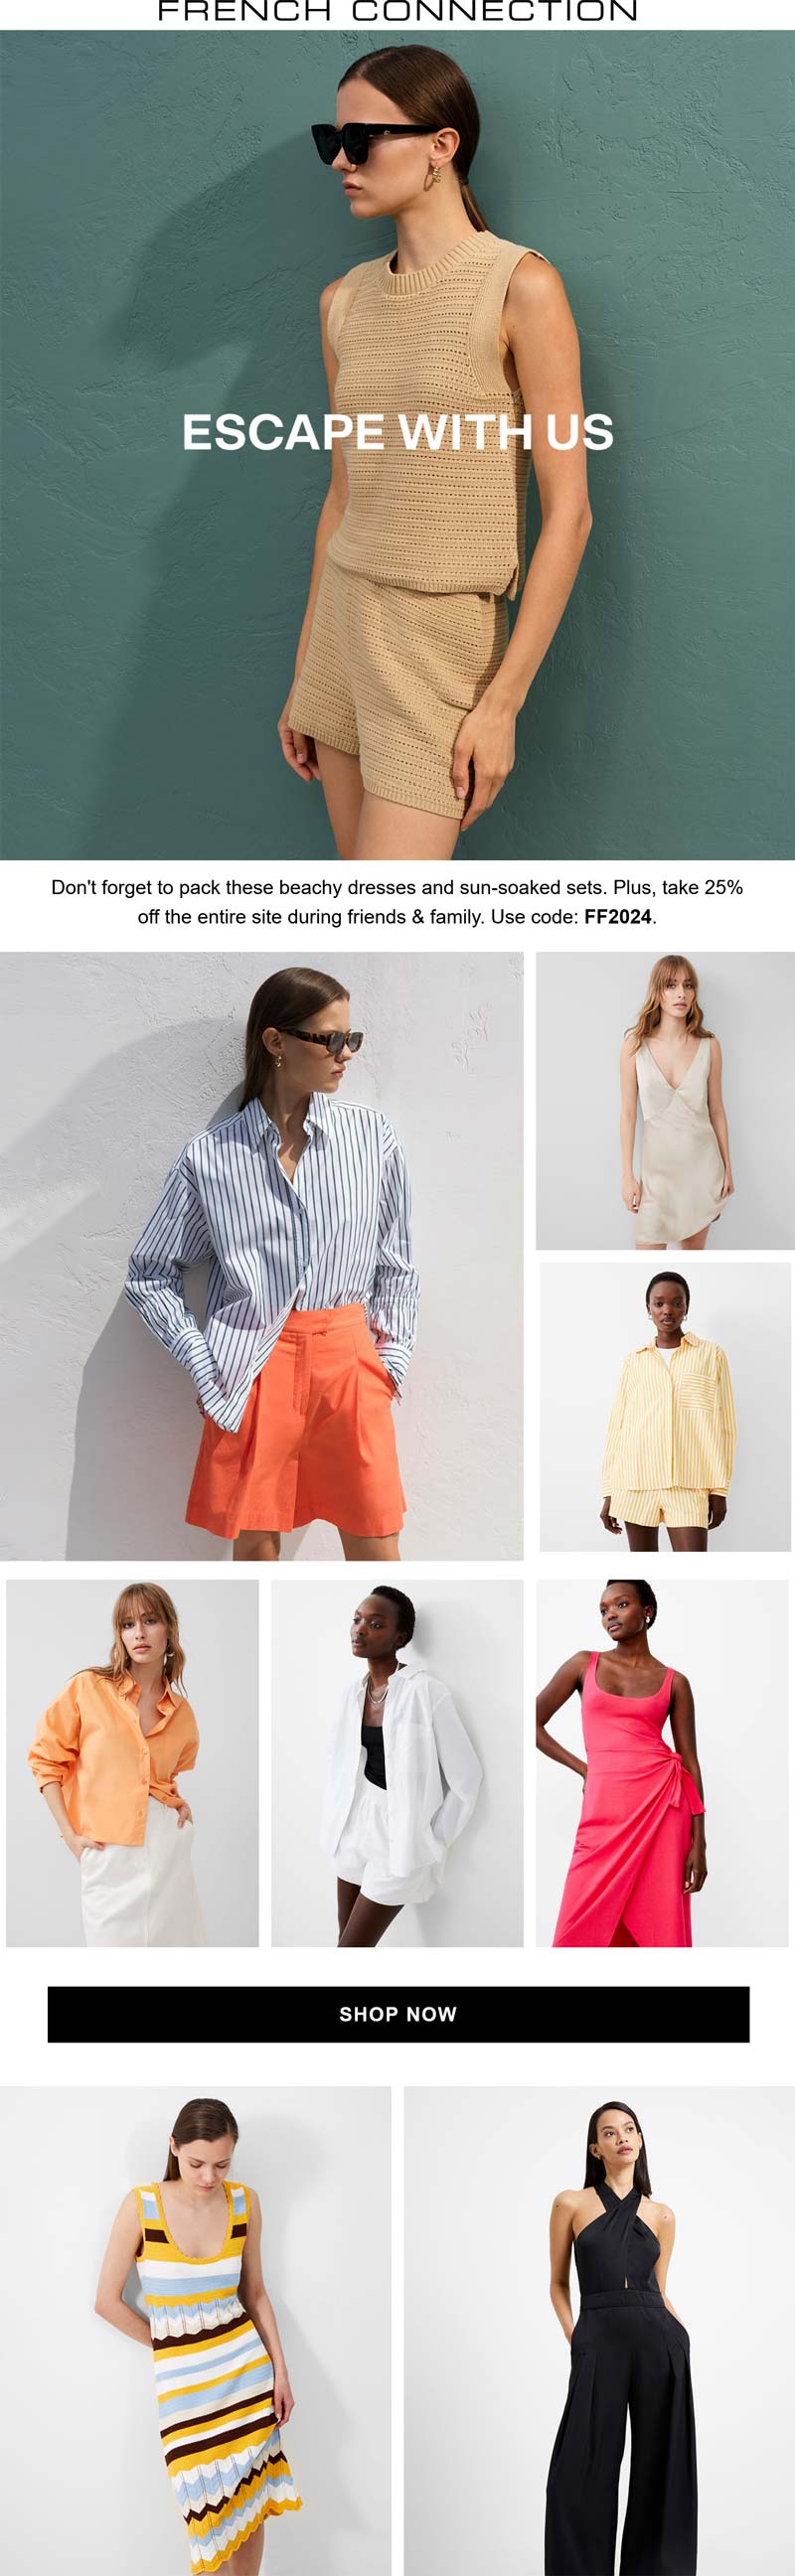 French Connection stores Coupon  25% off everything online at French Connection via promo code FF2024 #frenchconnection 